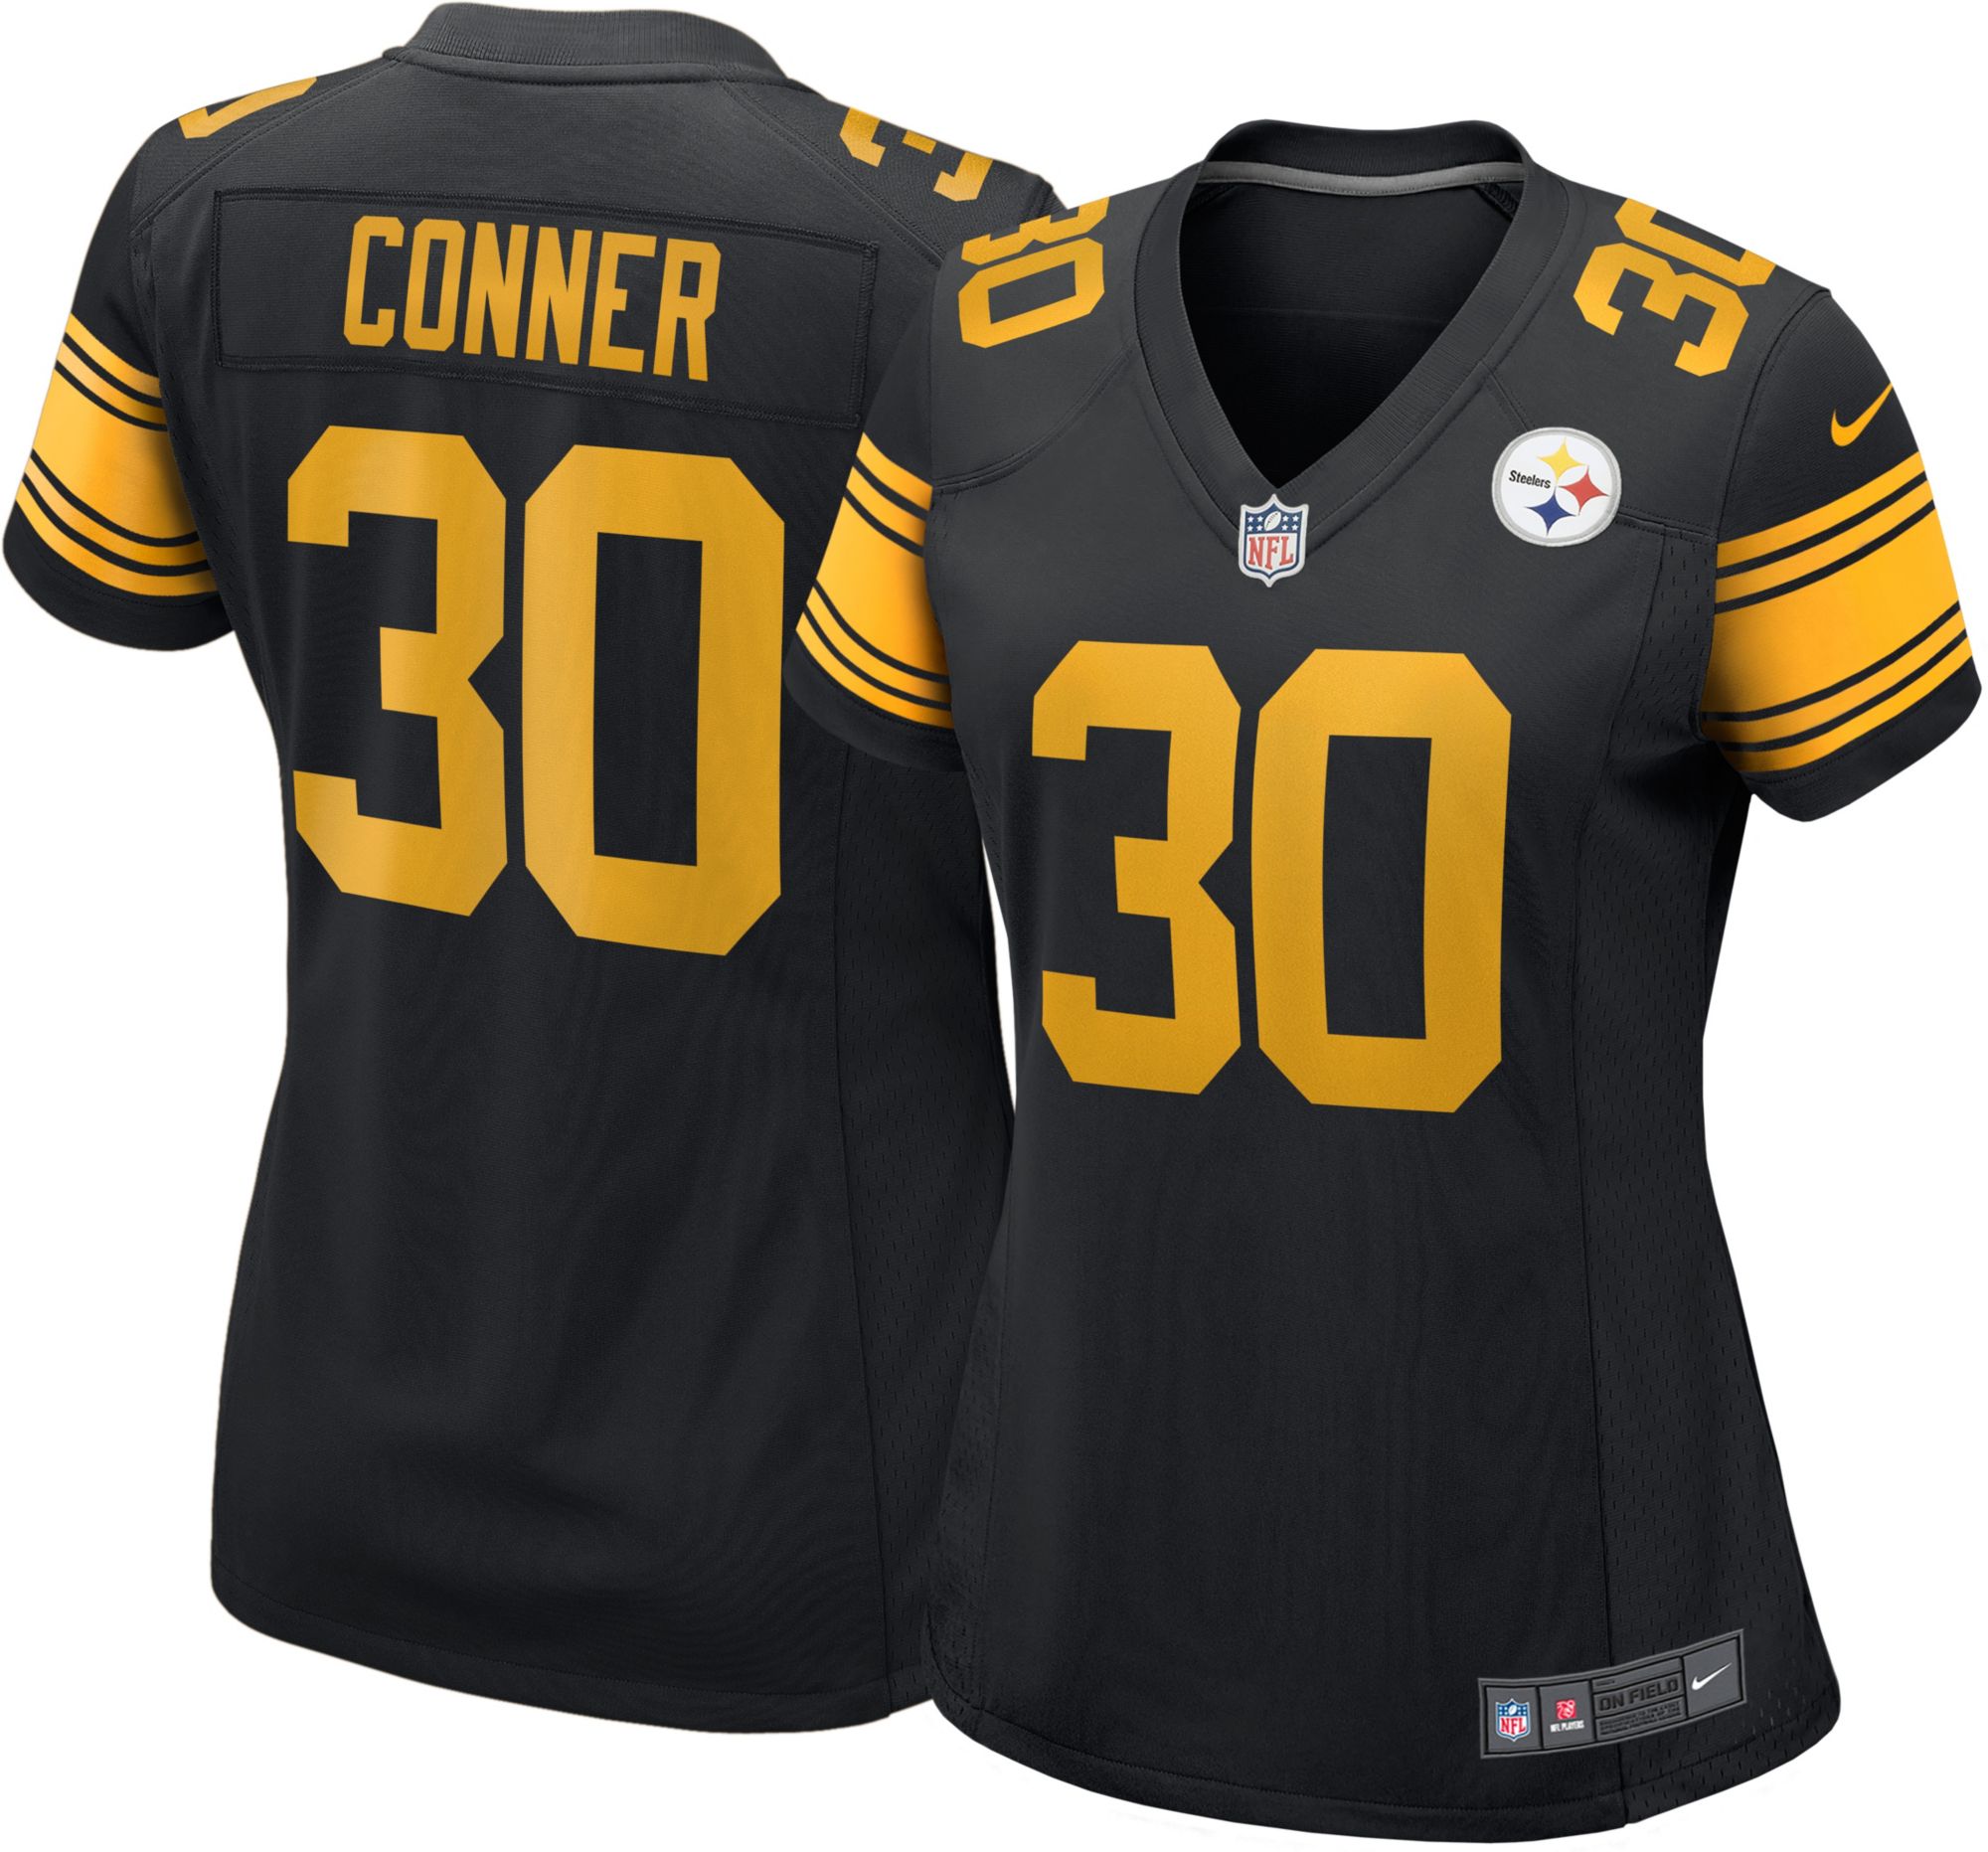 james conner jersey amazon